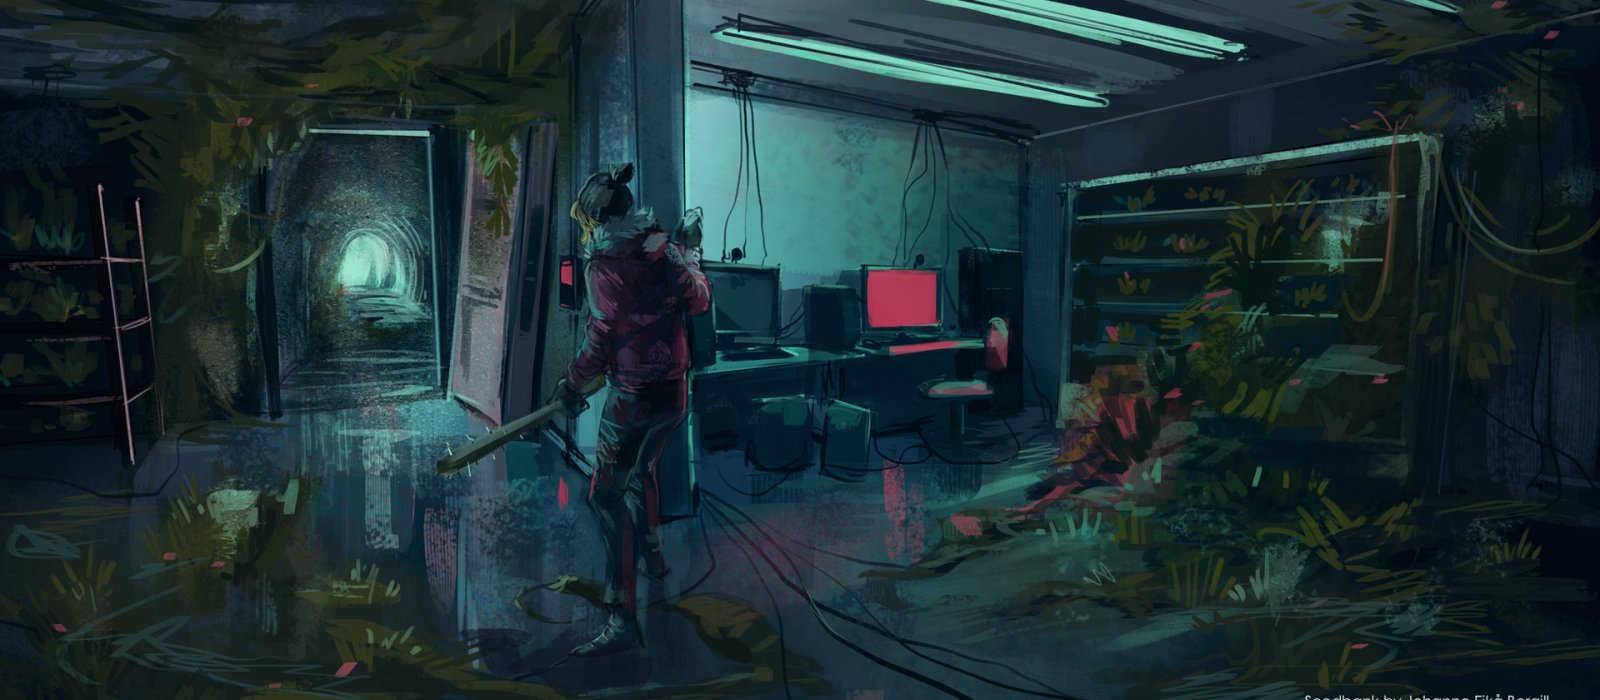 Digital illustration underground tunnel with computers and plant growth. Girl holding baseball bat with spikes.